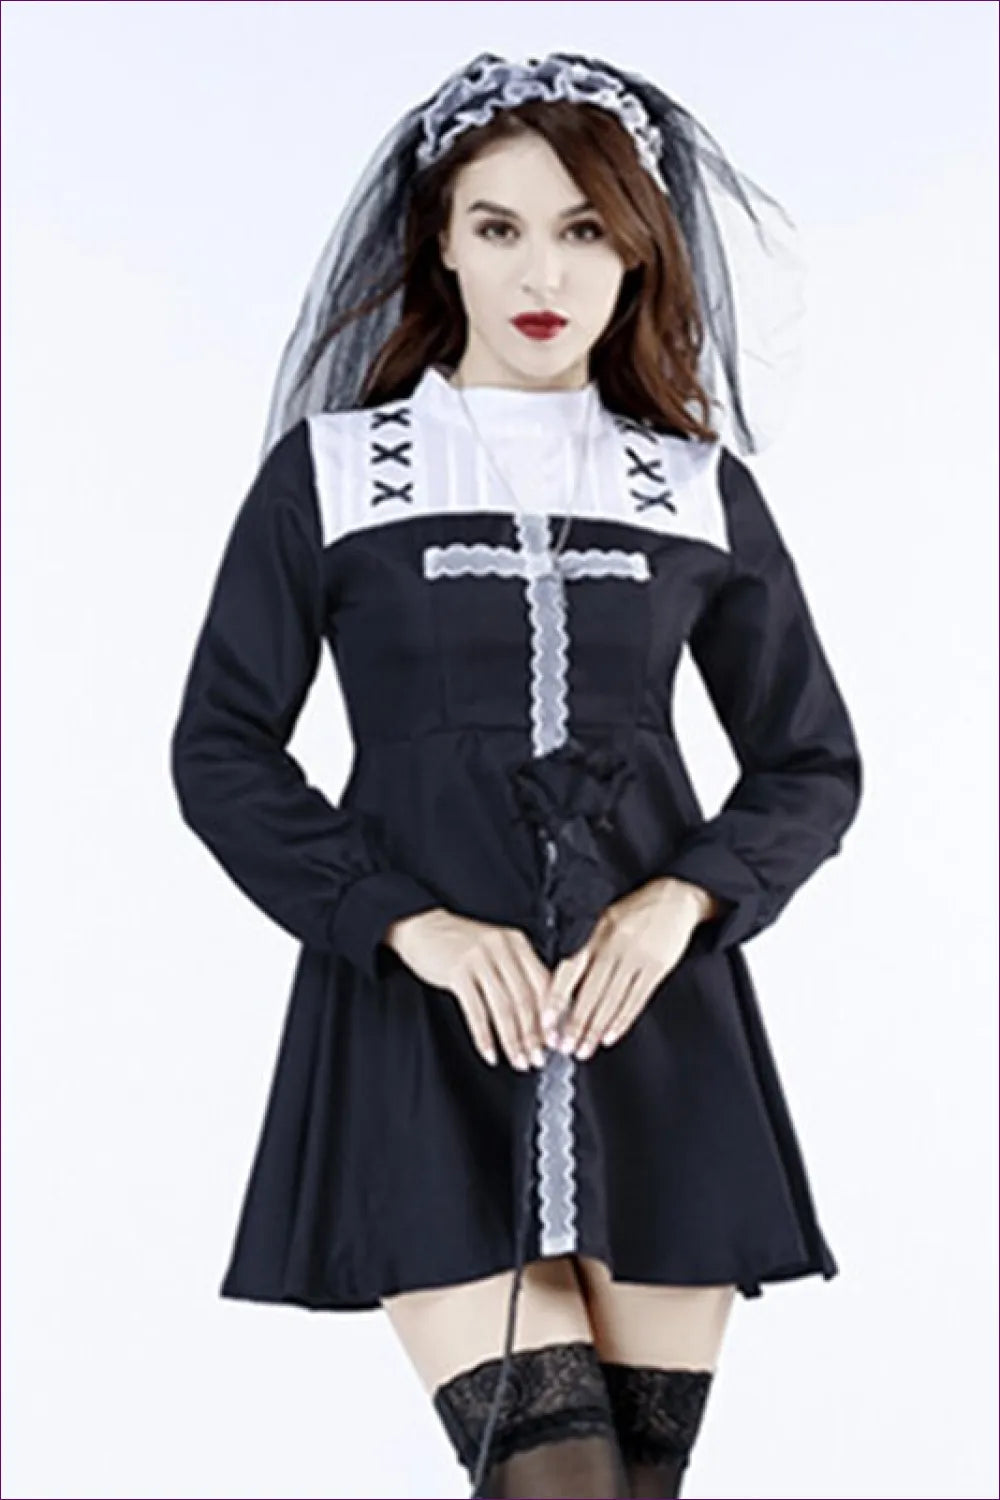 Embrace Divine Elegance With Our Nun Role Play Costume. This Polyester Ensemble Includes a Dress